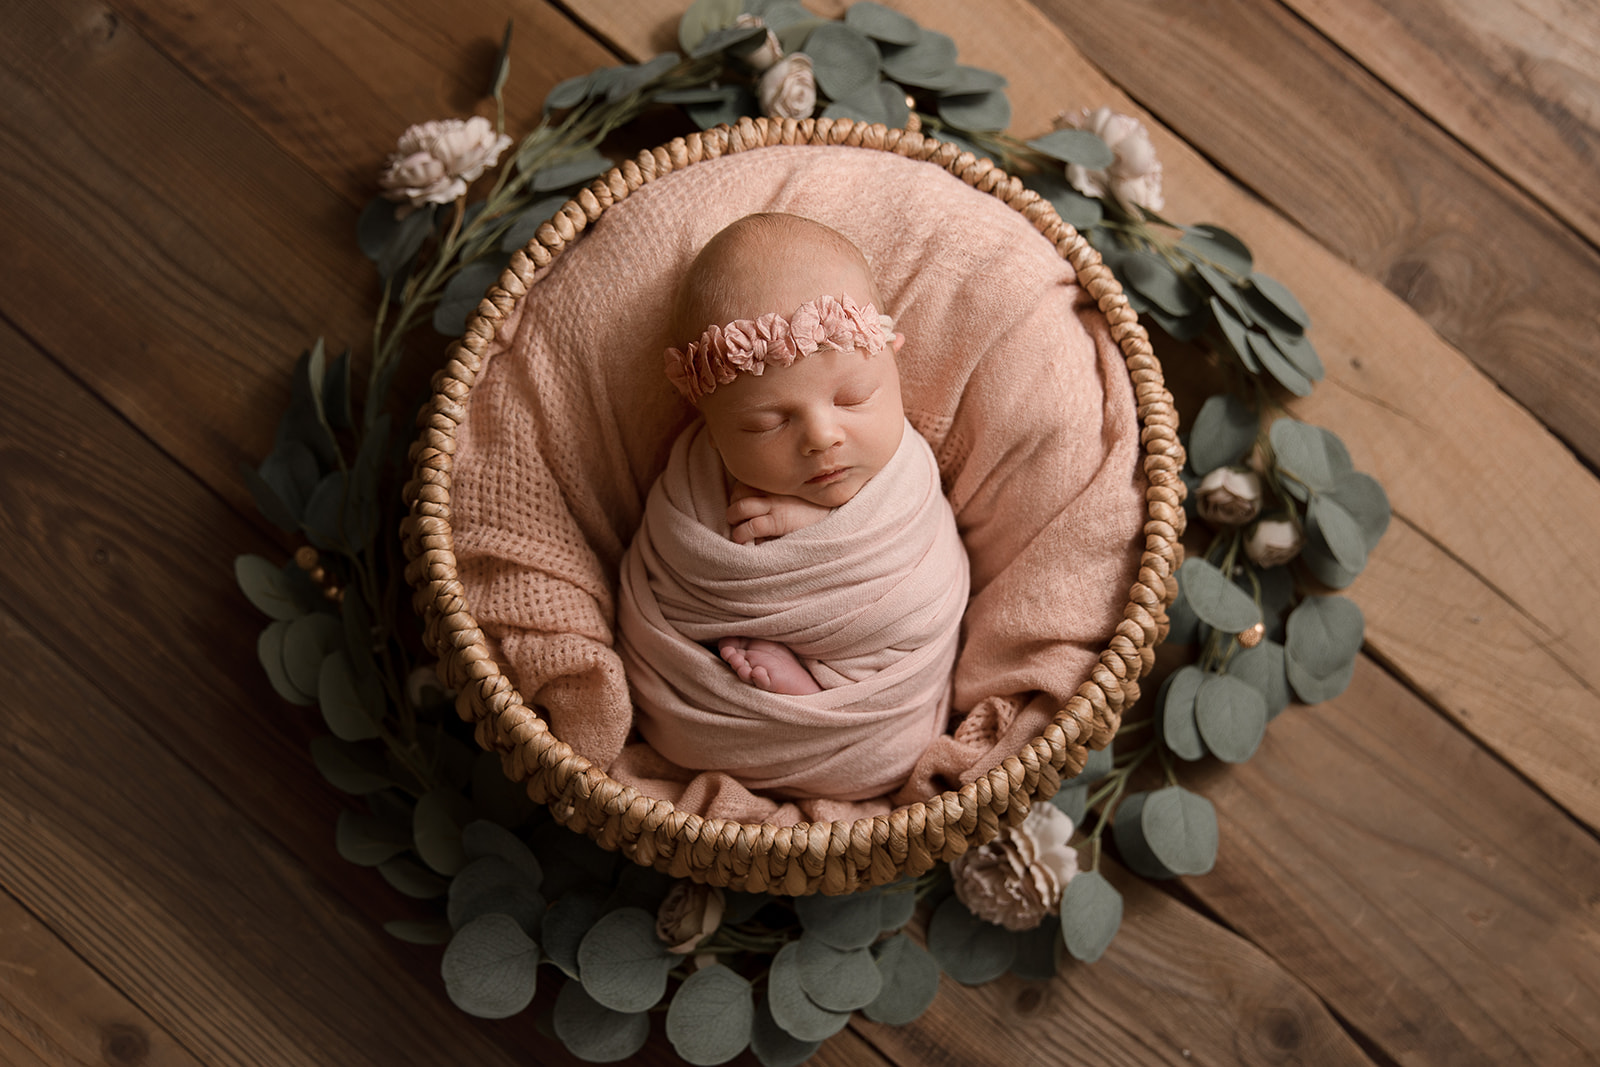 beautiful newborn baby in a basket with flowers